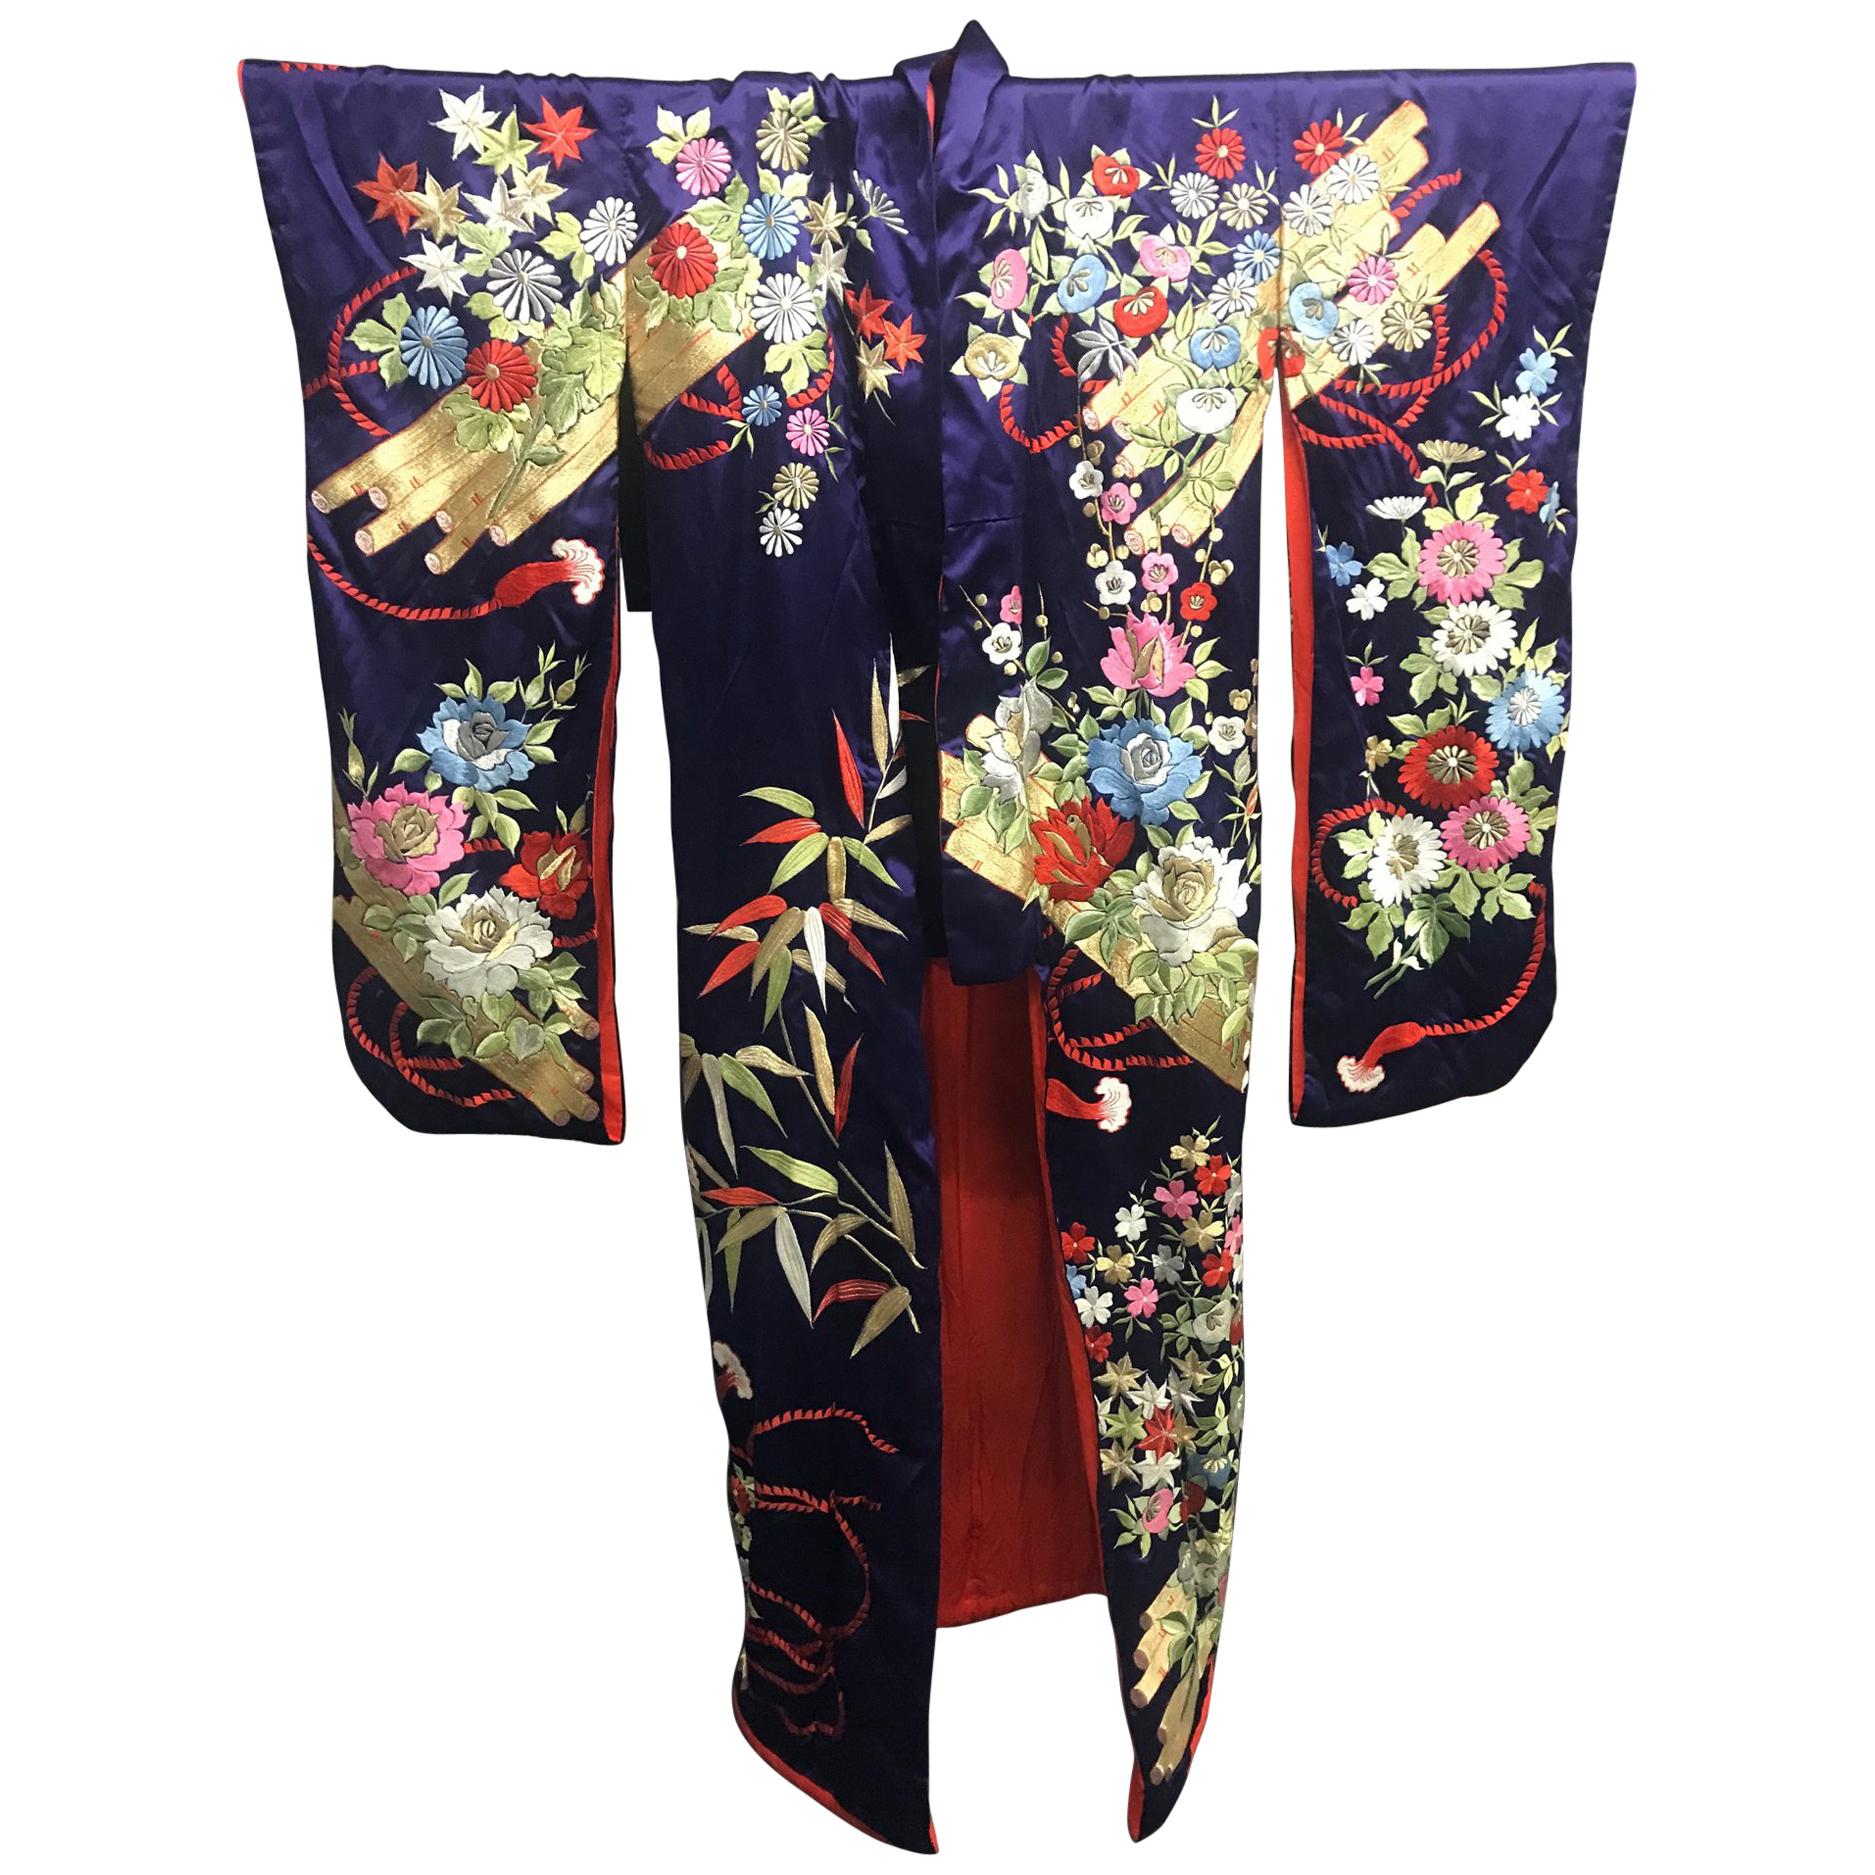 A vintage Uchikake Wedding Kimono/Robe for ceremonial occasion, circa 1940s in an Oriental Art Deco style. Deep violet/purple silk background with elaborate and intricate embroidery in colored, sliver and gold threads. The front and the back of the